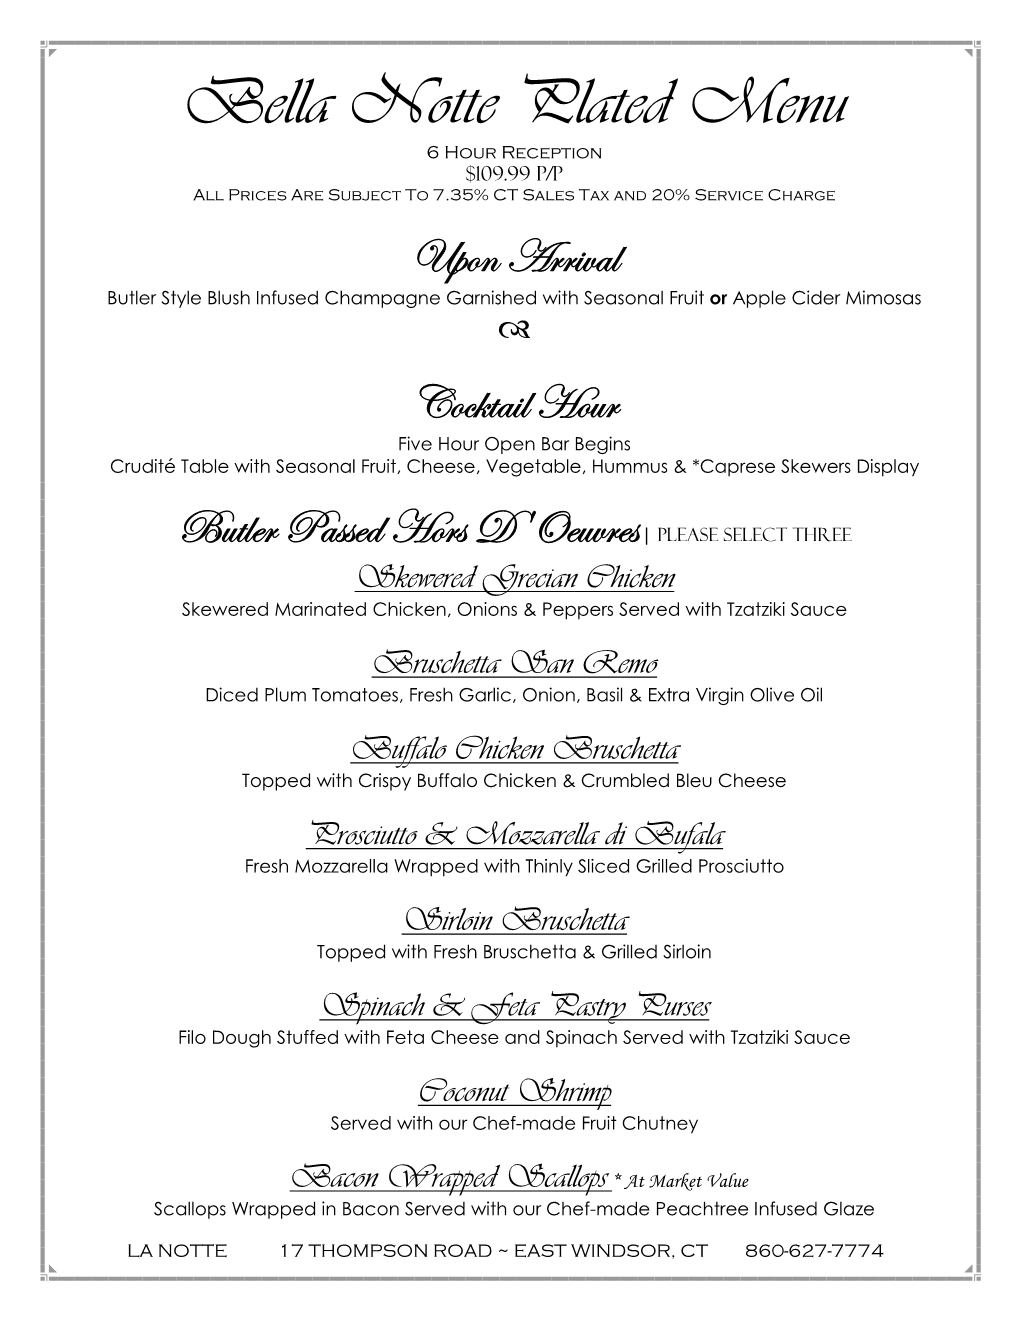 Bella Notte Plated Menu 6 Hour Reception $109.99 P/P All Prices Are Subject to 7.35% CT Sales Tax and 20% Service Charge